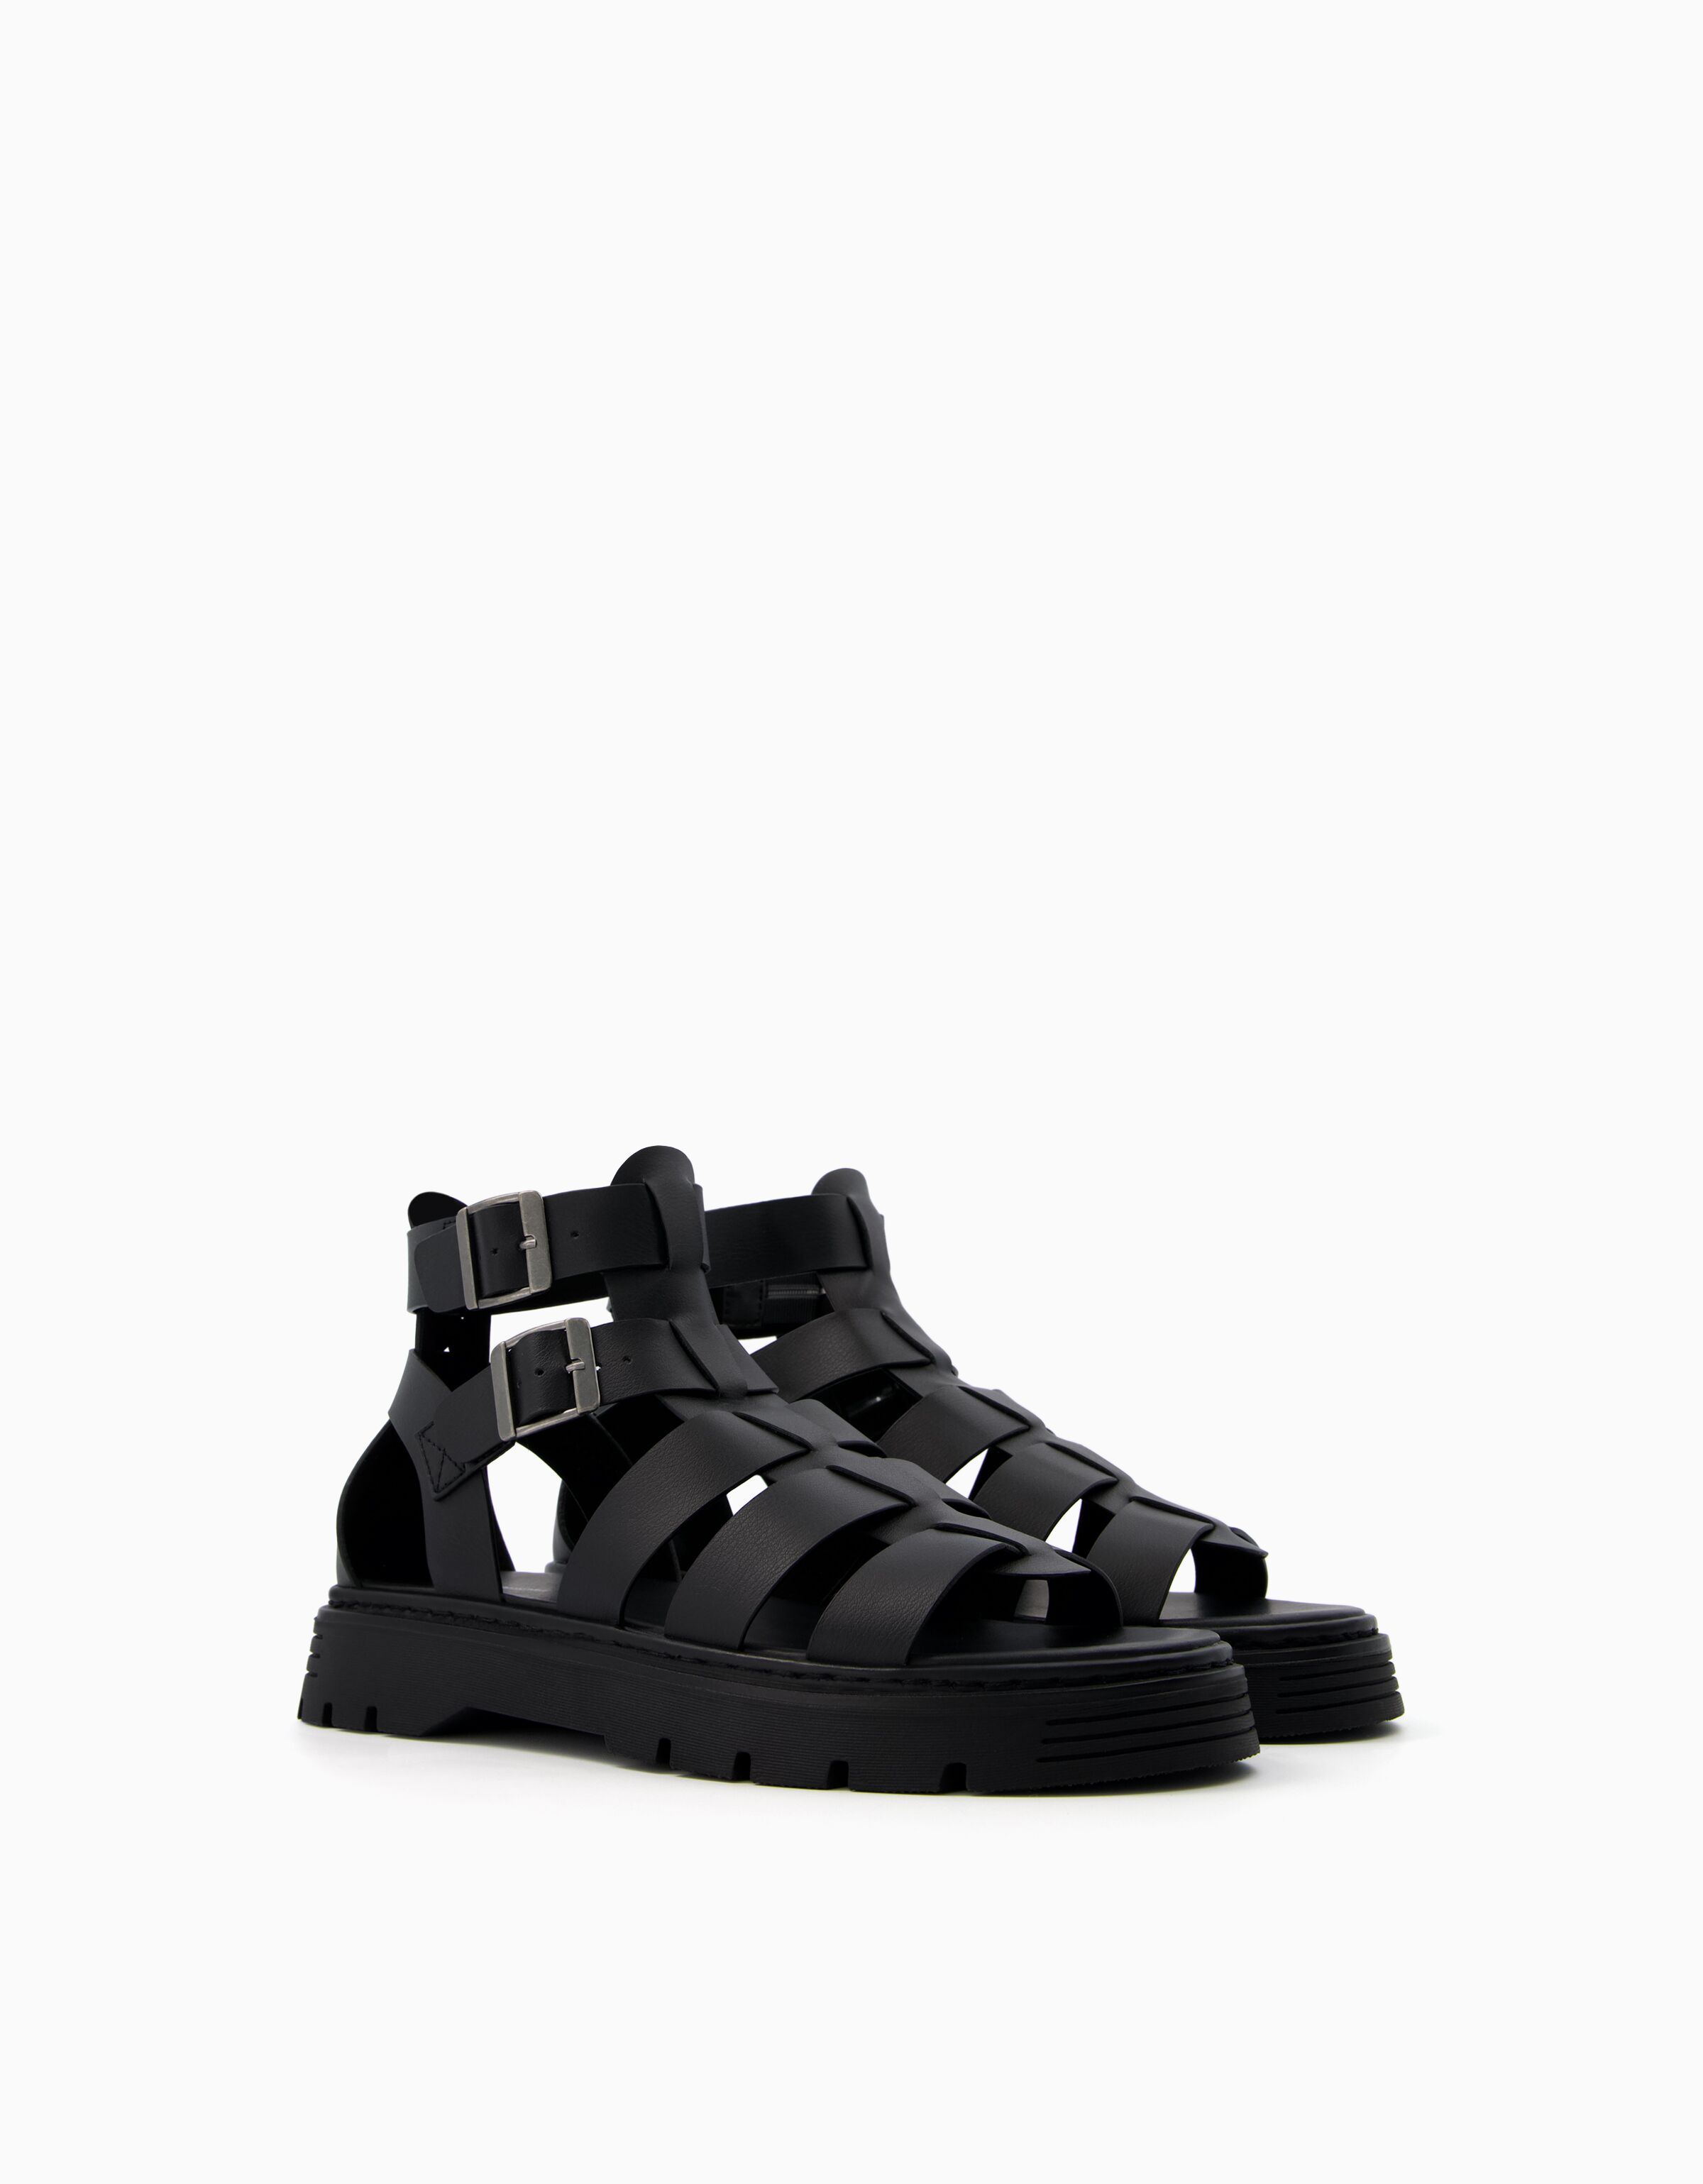 Buy Gladiator Men Leather Sandals, Gay Strappy Sandals, Second Toe Ring  Sandals, Trendy Summer Sandals Universe M Online in India - Etsy